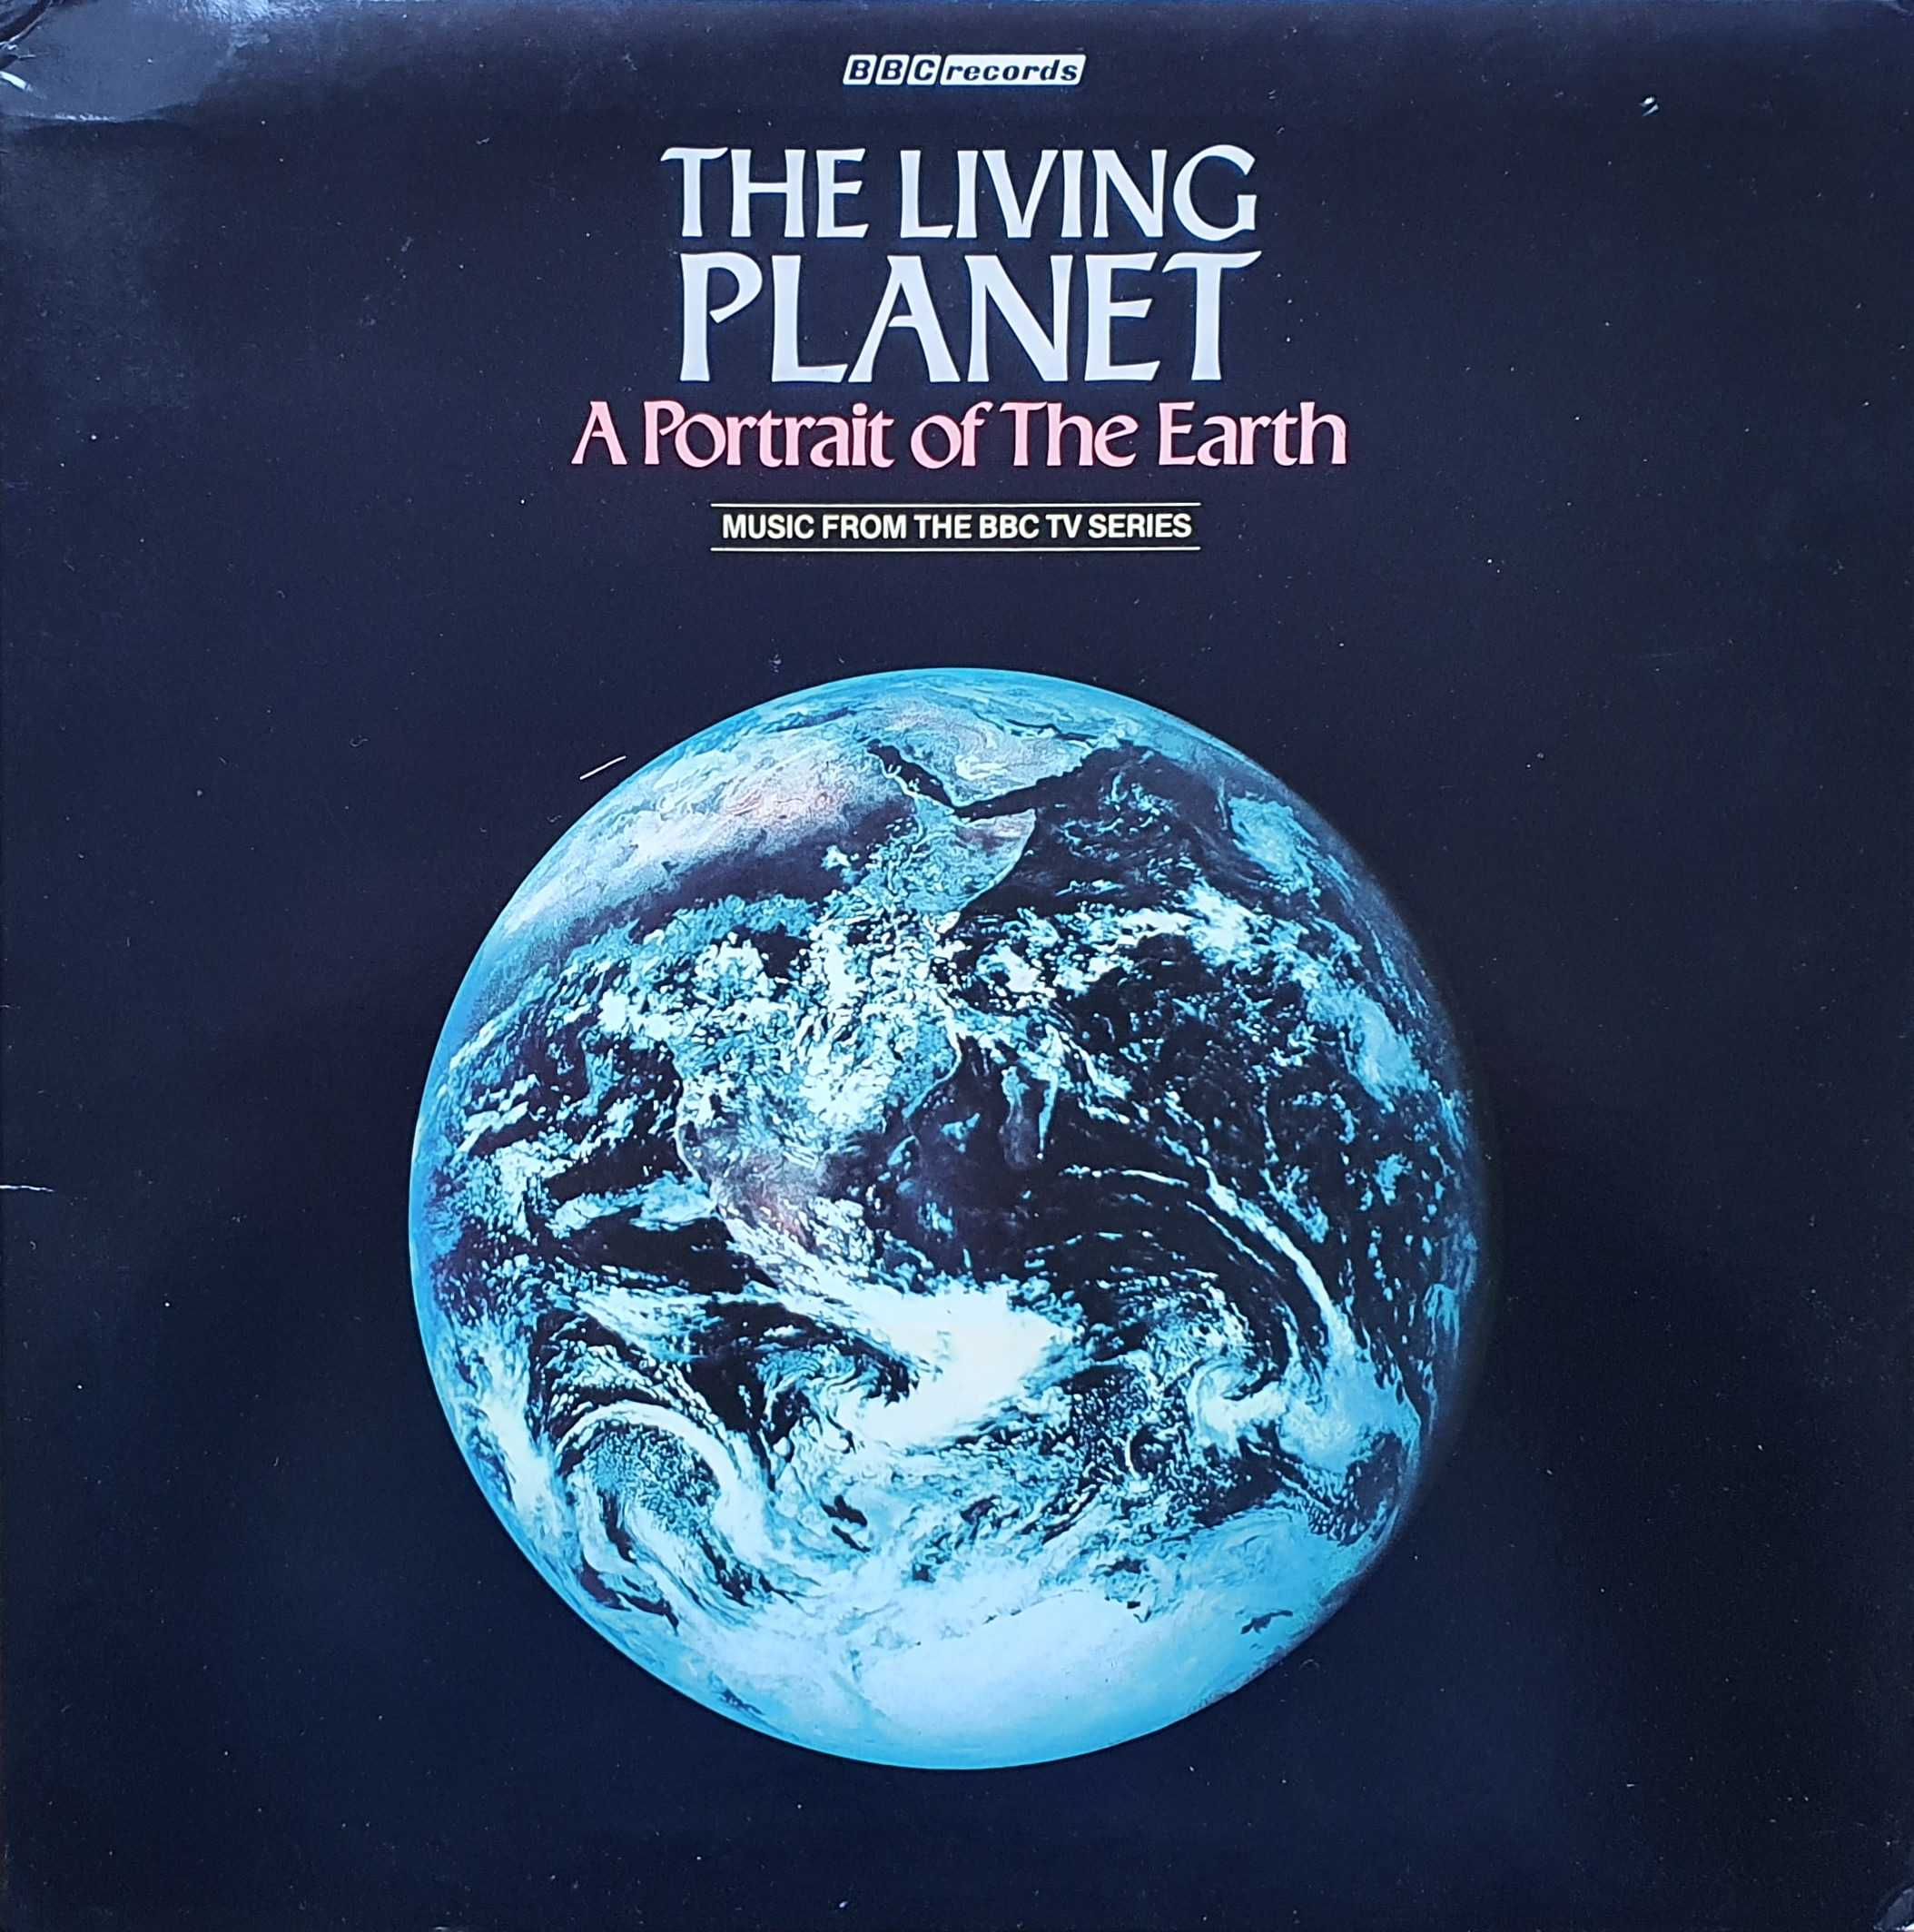 Picture of REB 496 The living planet by artist Elizabeth Parker and the BBC Radiophonic Workshop from the BBC albums - Records and Tapes library